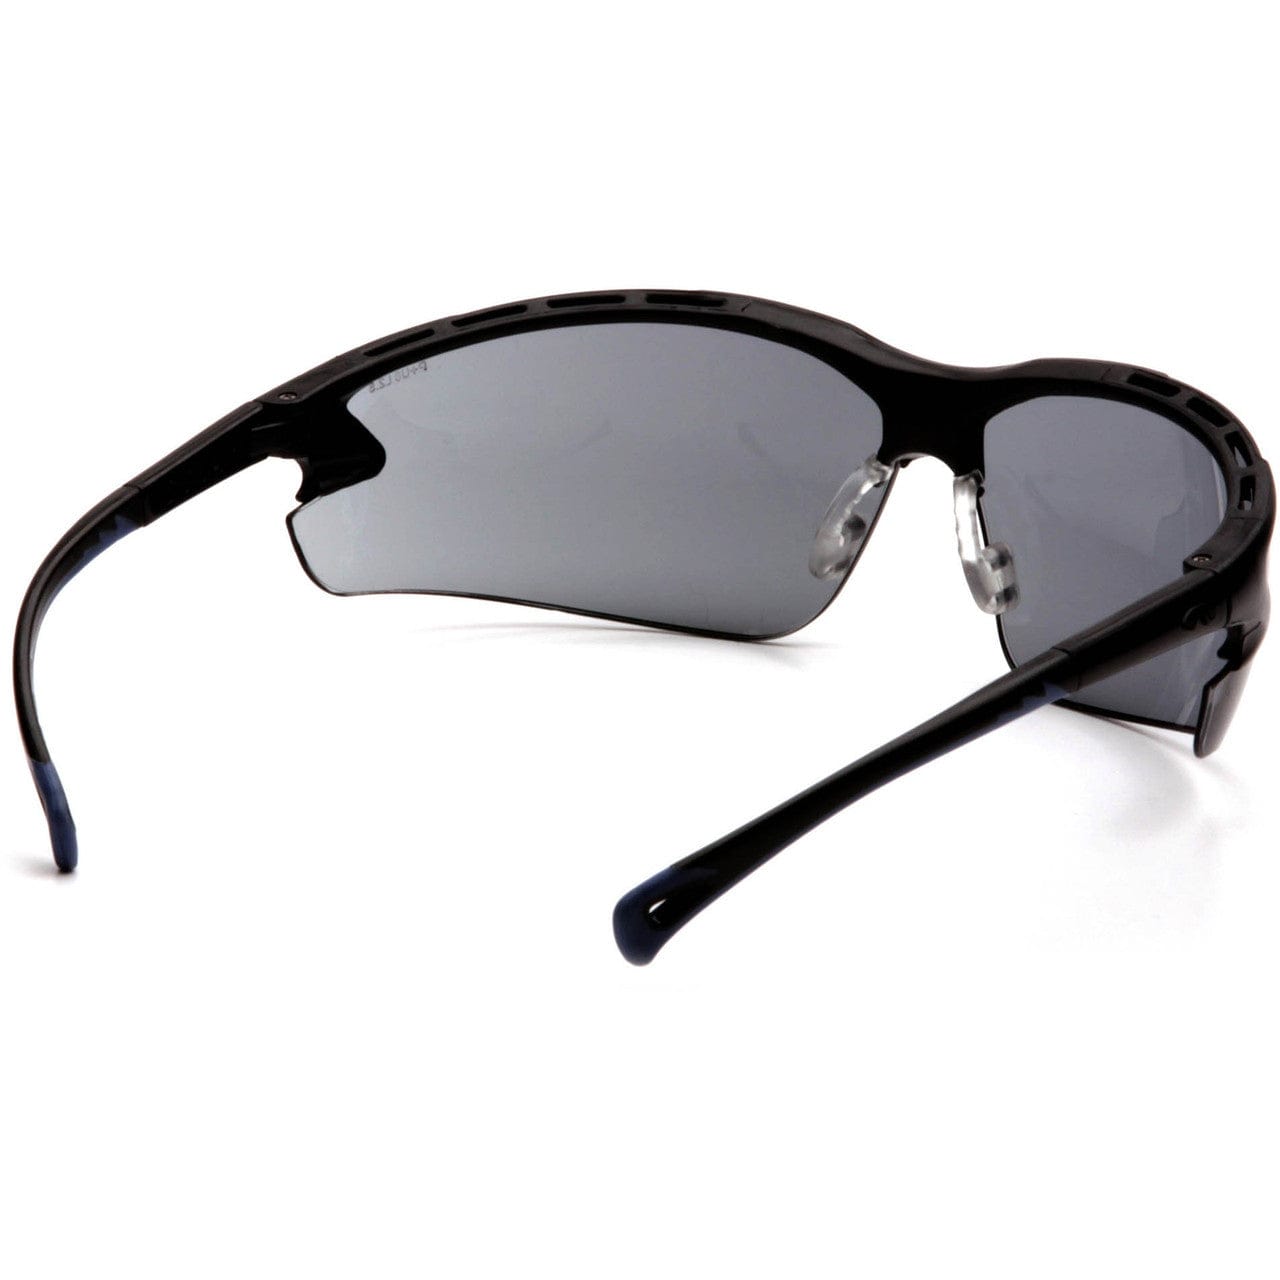 Pyramex Venture 3 Safety Glasses with Black Frame and Gray Lens SB5720D Inside View